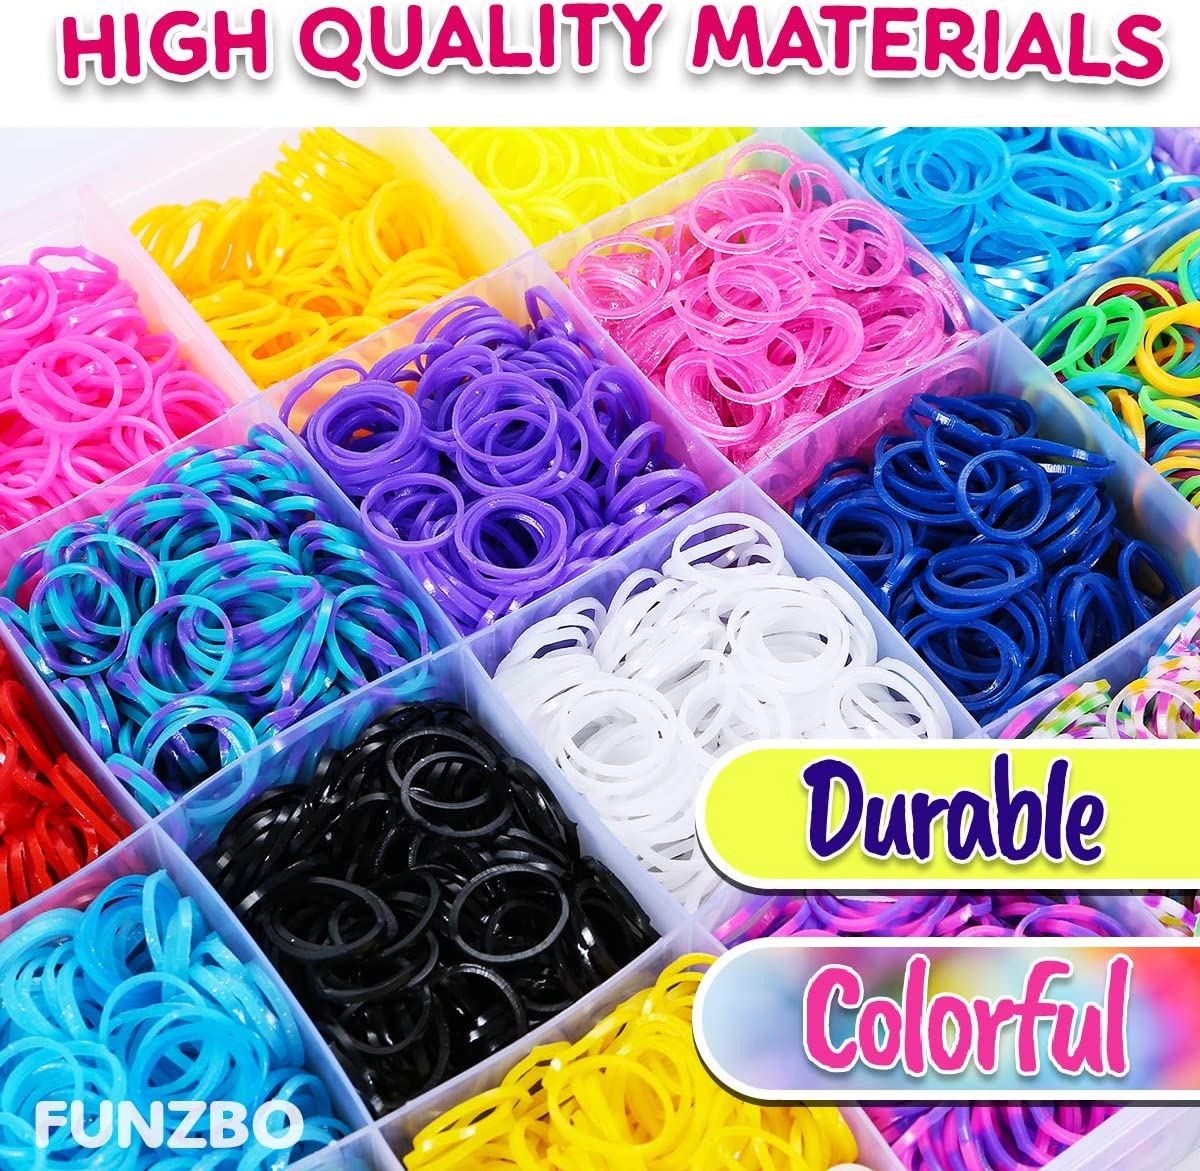 Buy Loom Rubber Bands Bracelet Kit With Premium Quality